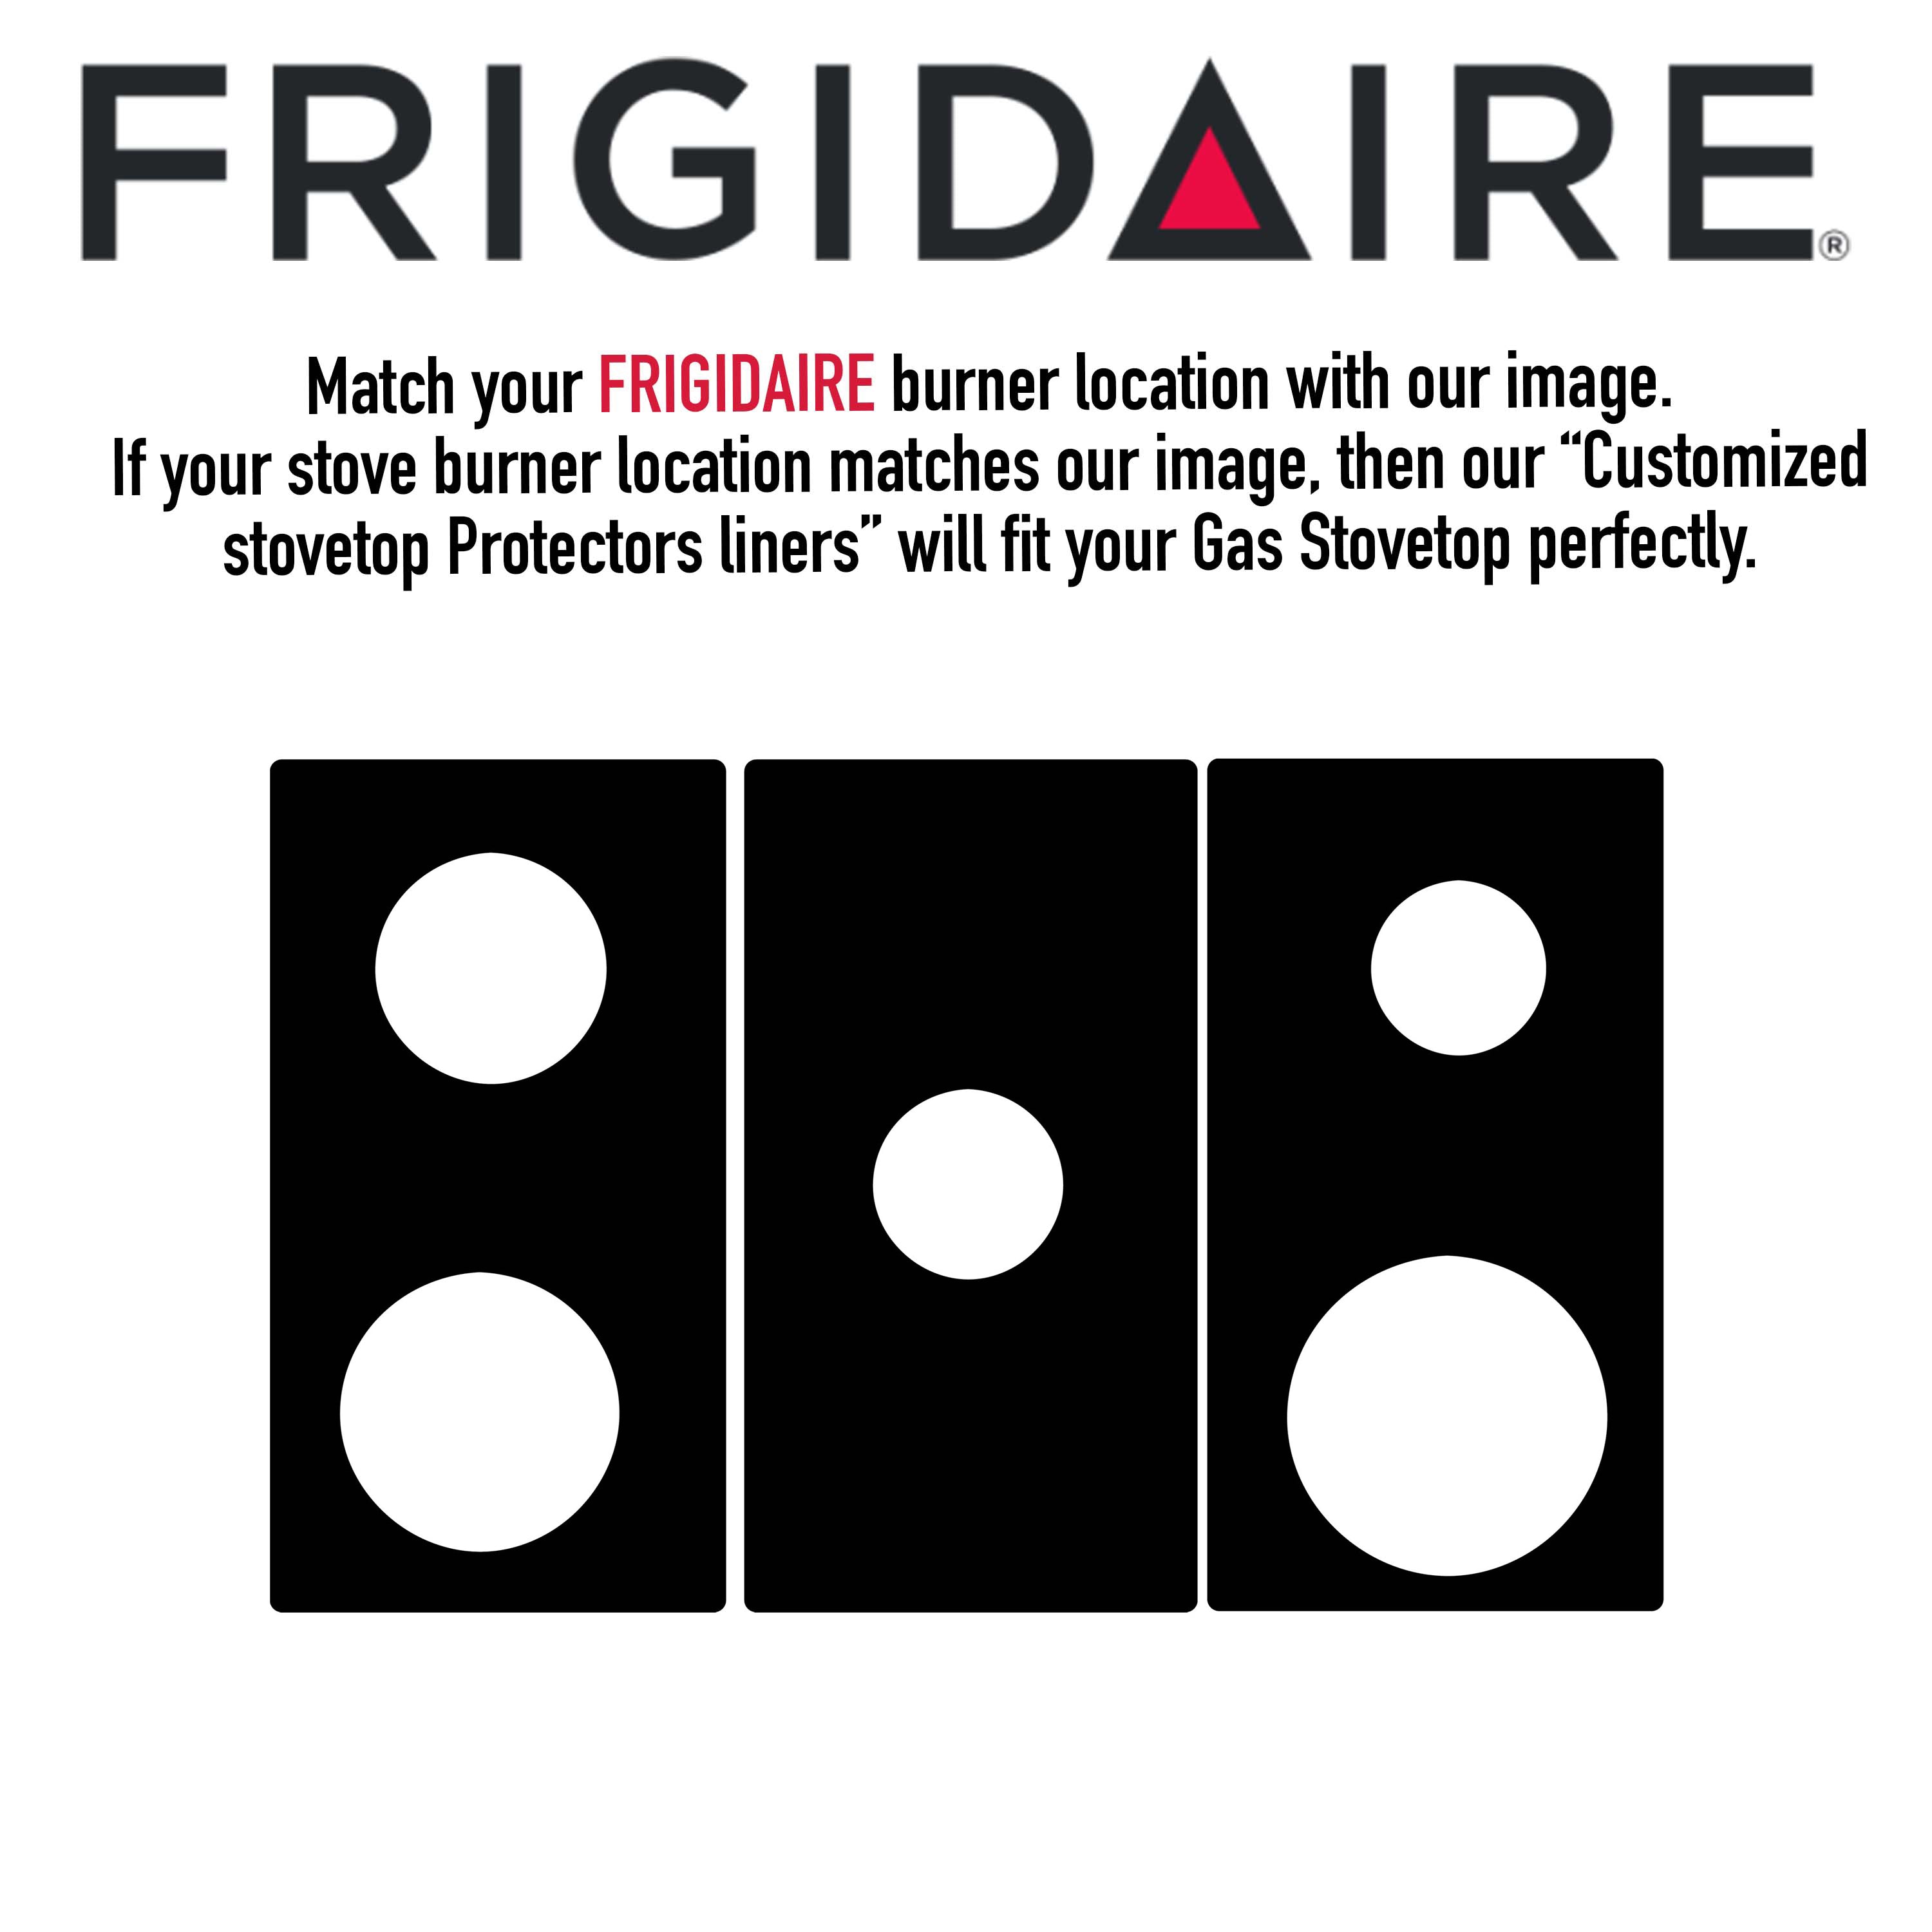 Frigidaire Stove Protector Liners - Stove Top Protector for Frigidaire –  Premium Plus Inc